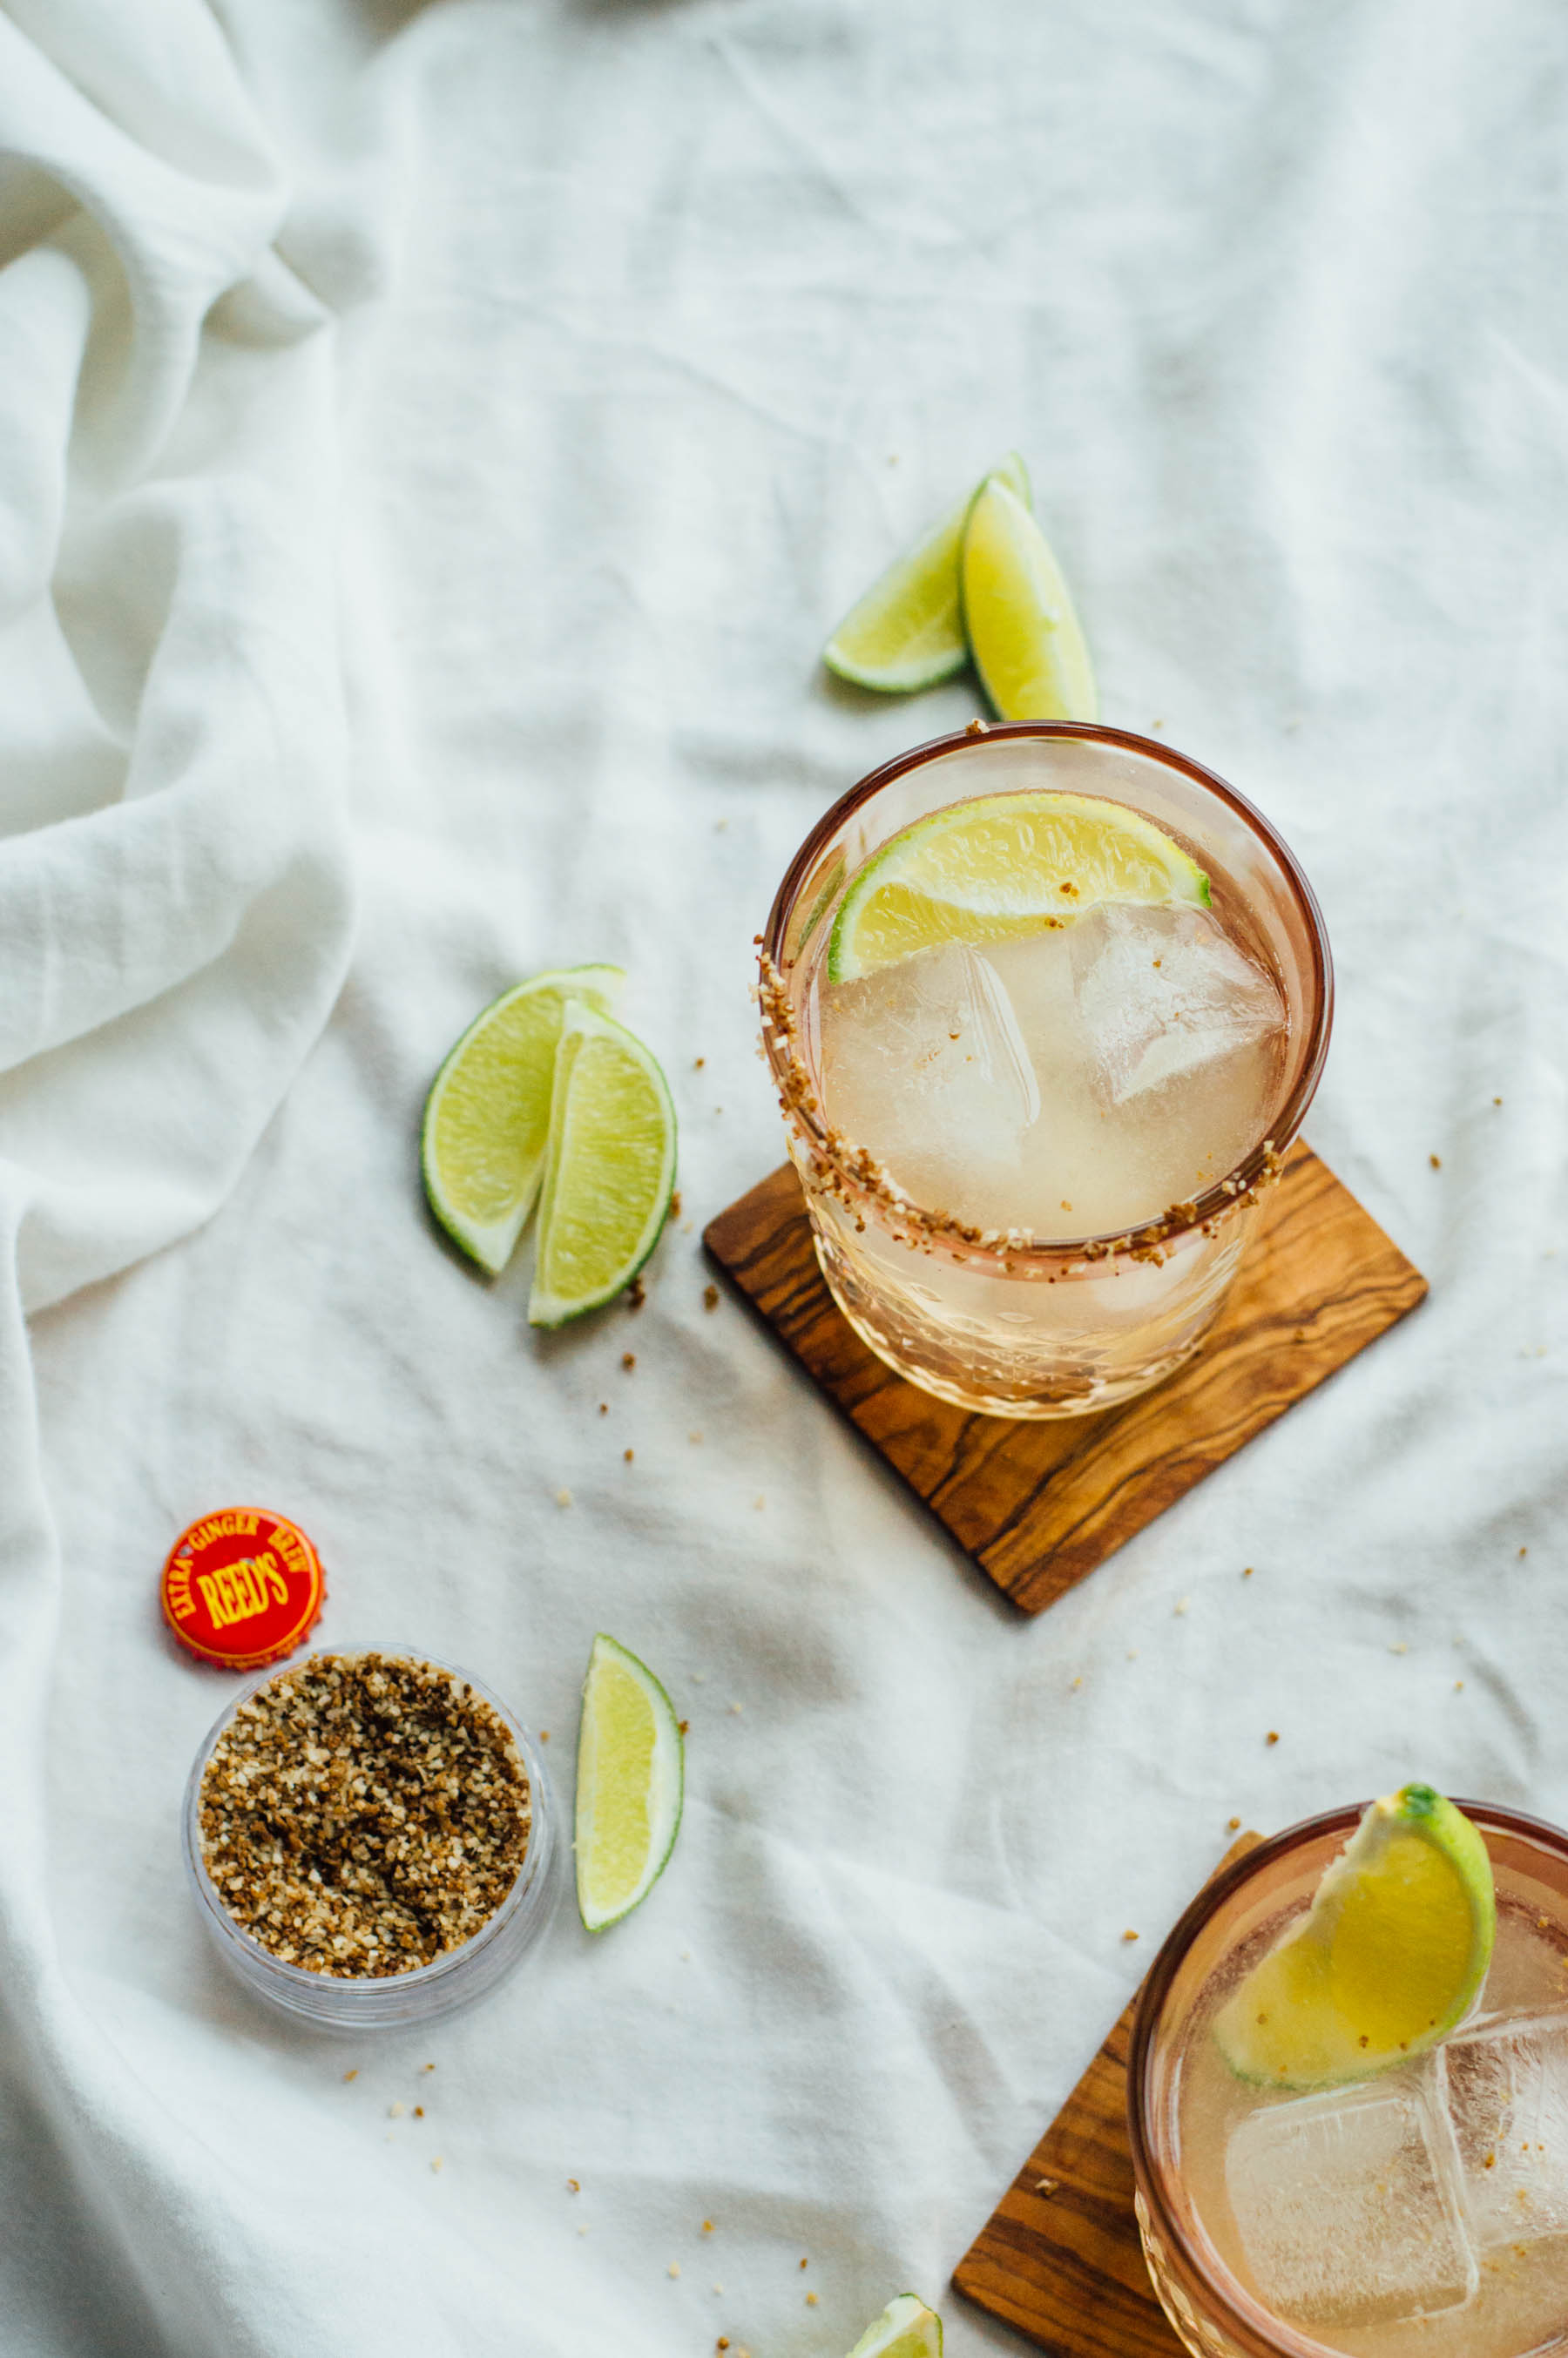 Honey & Smoke: An easy mezcal cocktail recipe with just four ingredients! Here's how to make your own | bygabriella.co